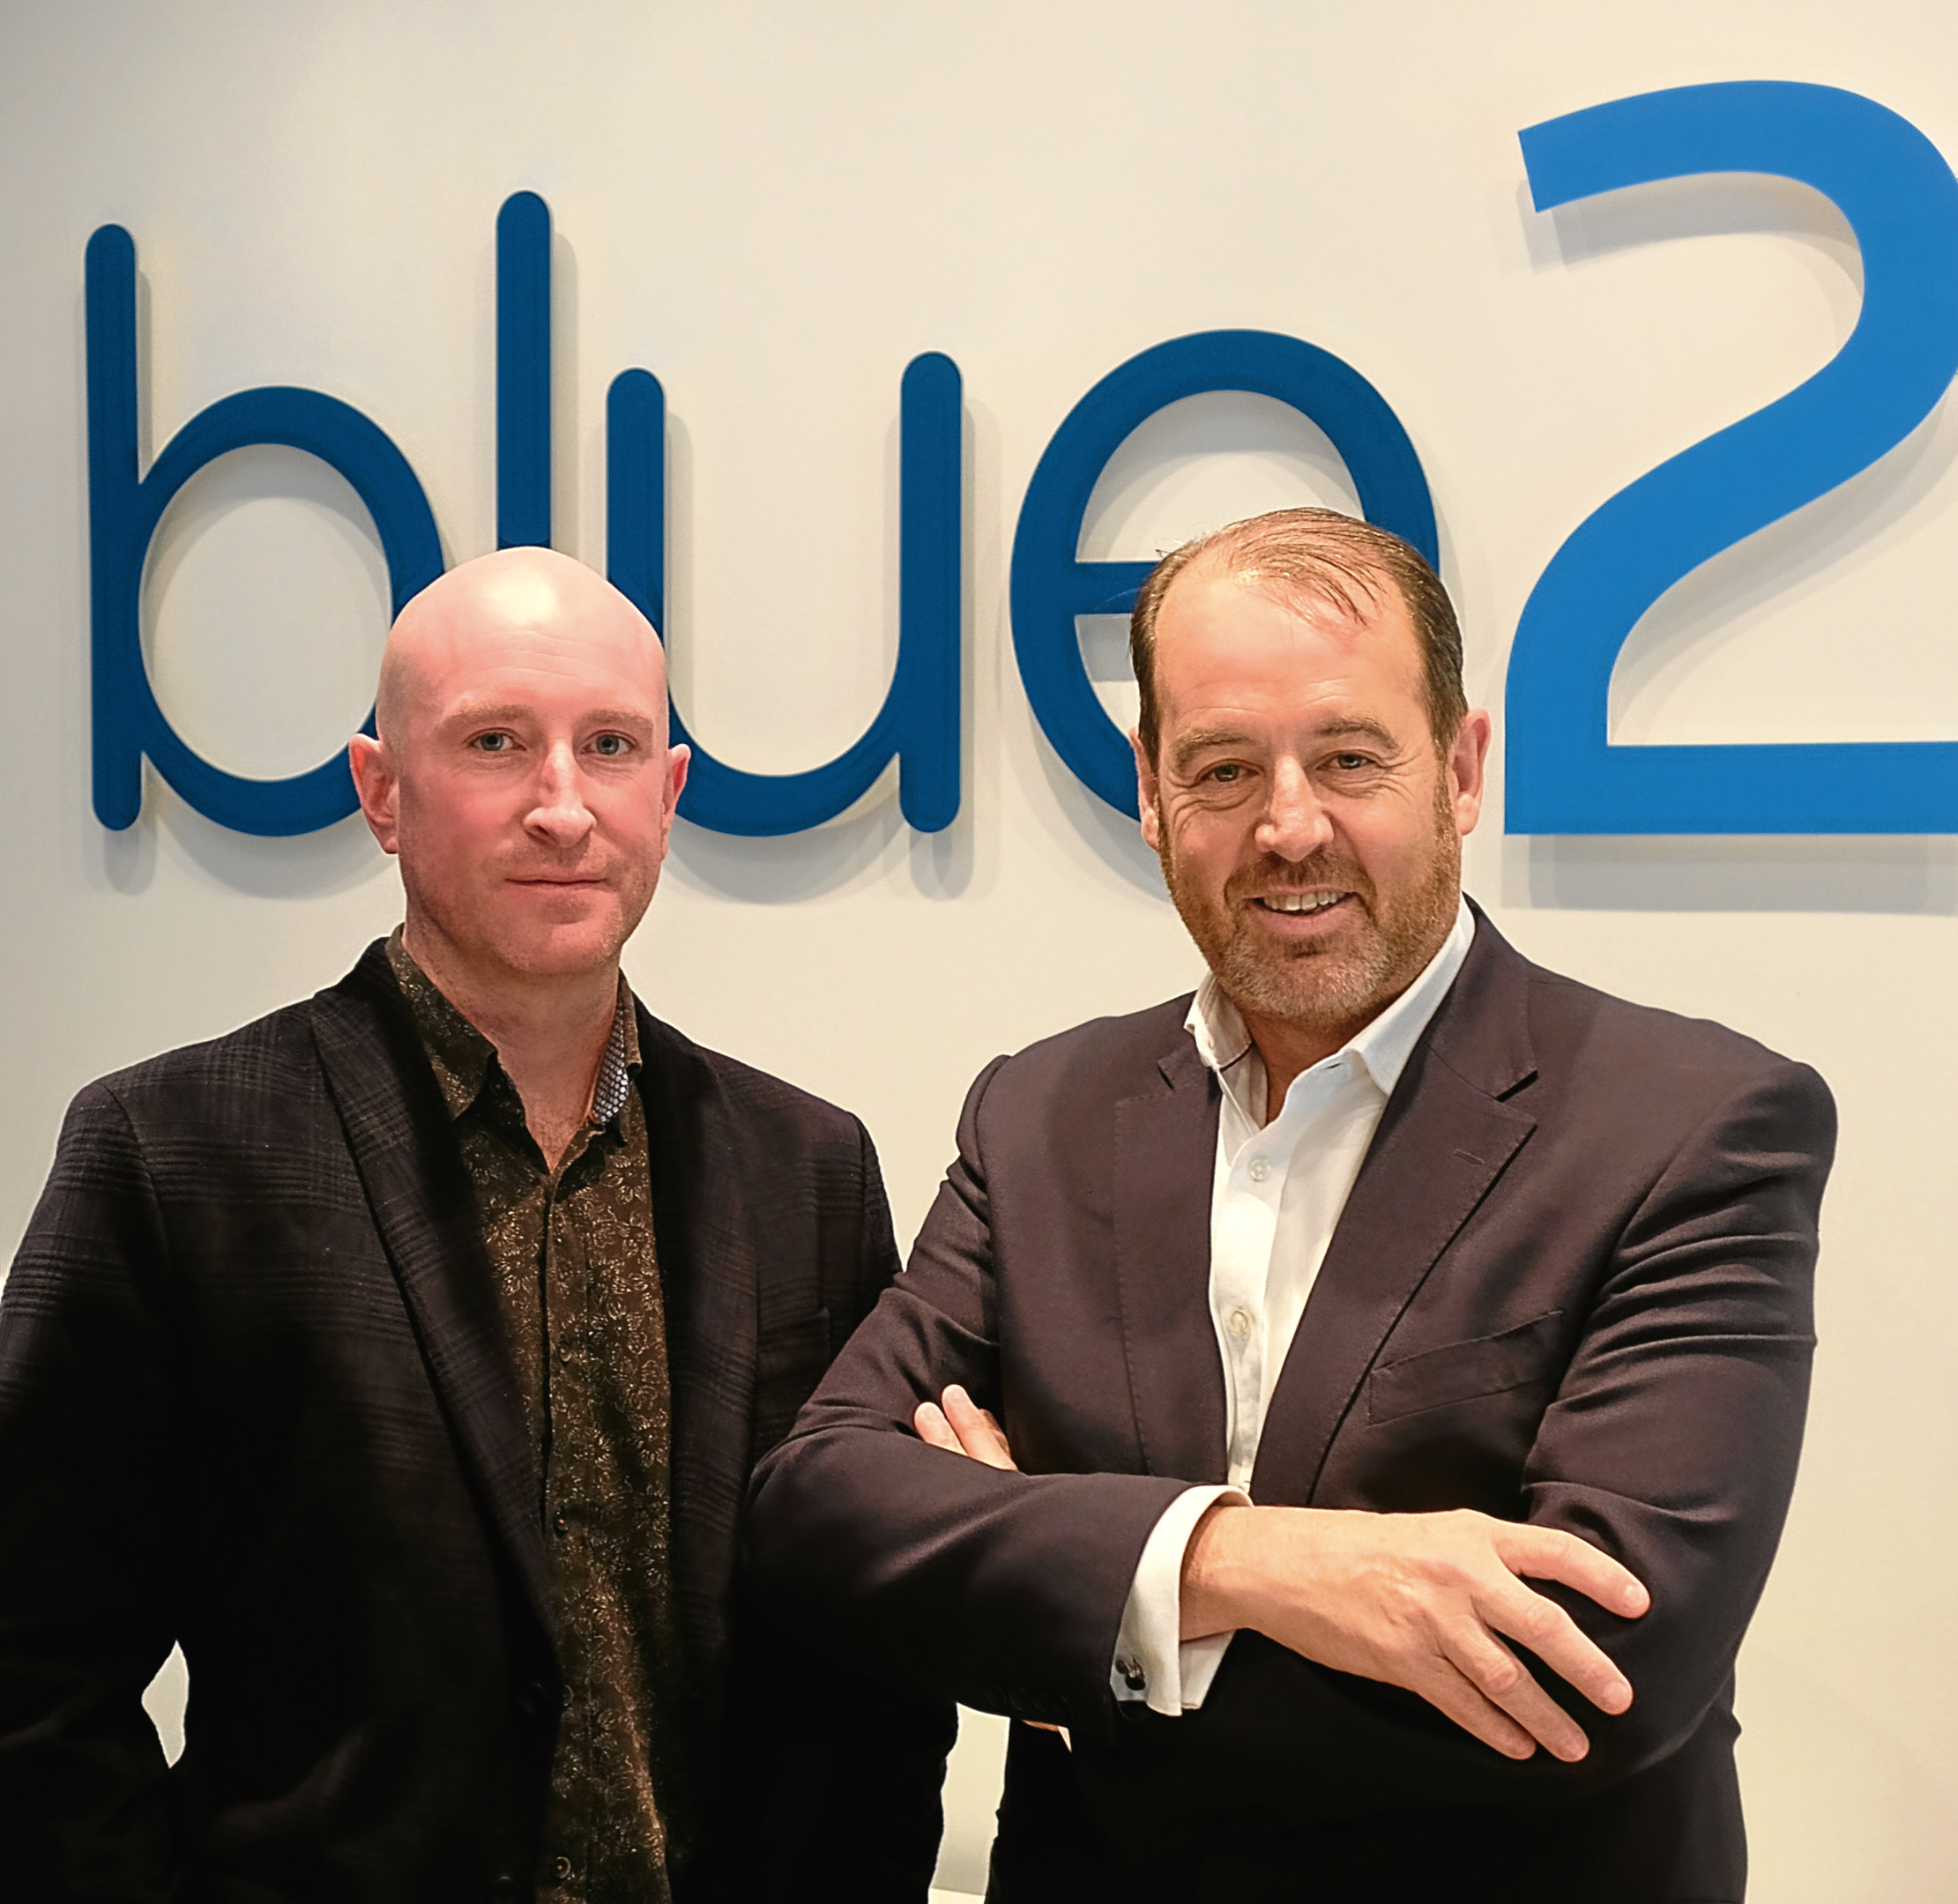 Chris Gilchrist and Scott McCallum at the Blue2 Digital offices in Broughty Ferry